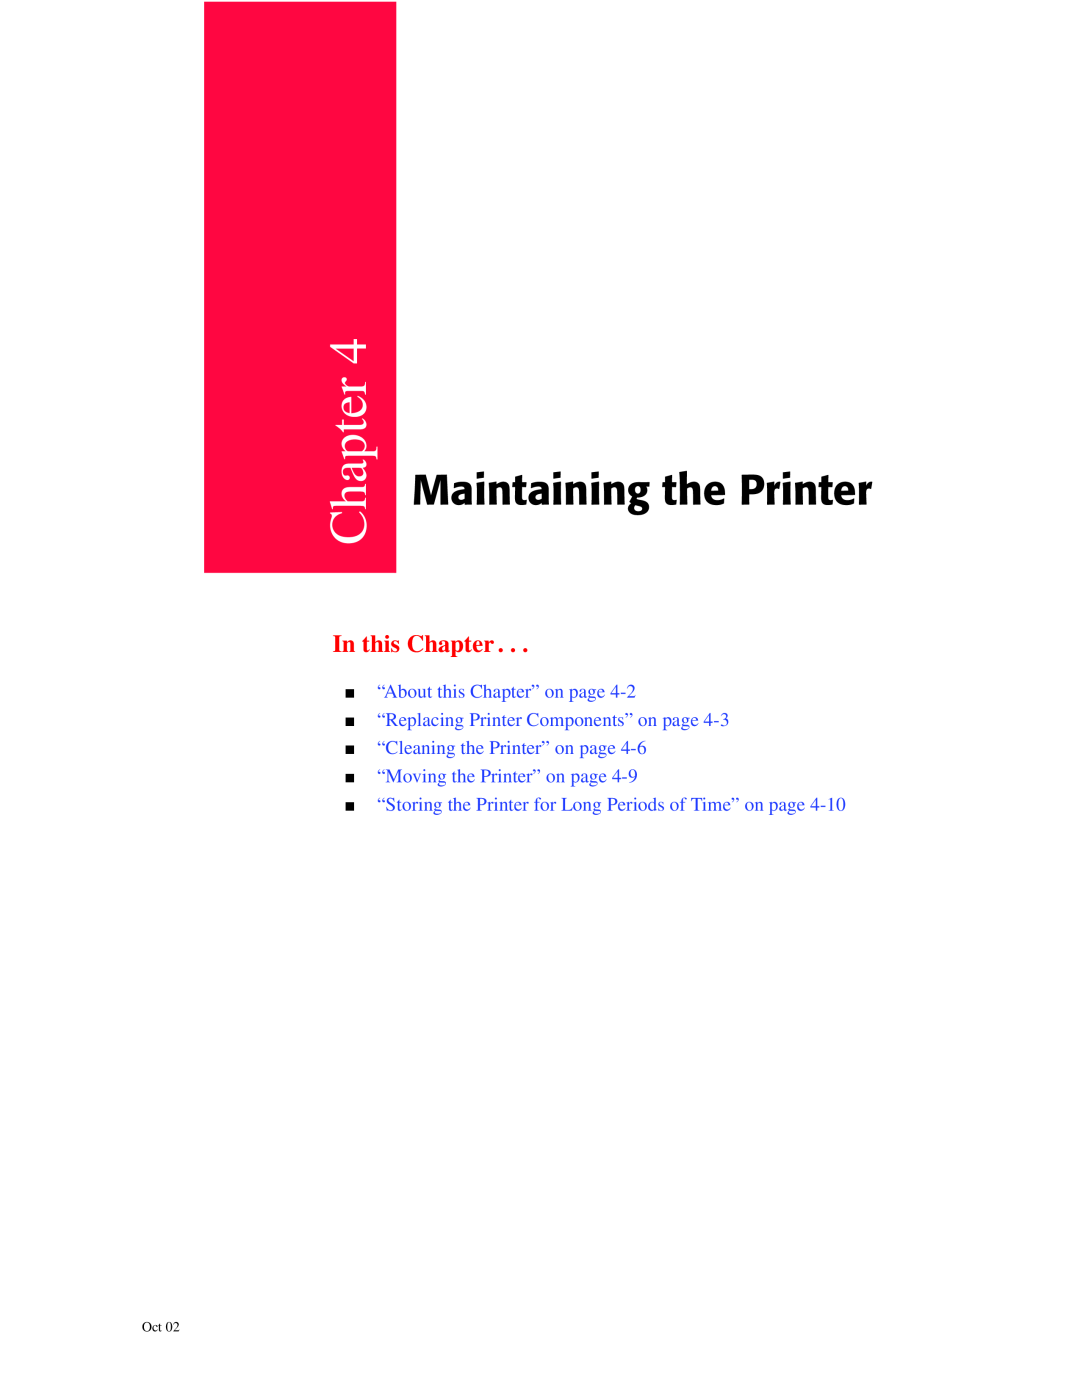 Oki 6100 Maintaining the Printer, In this Chapter, “About this Chapter” on page “Replacing Printer Components” on page 